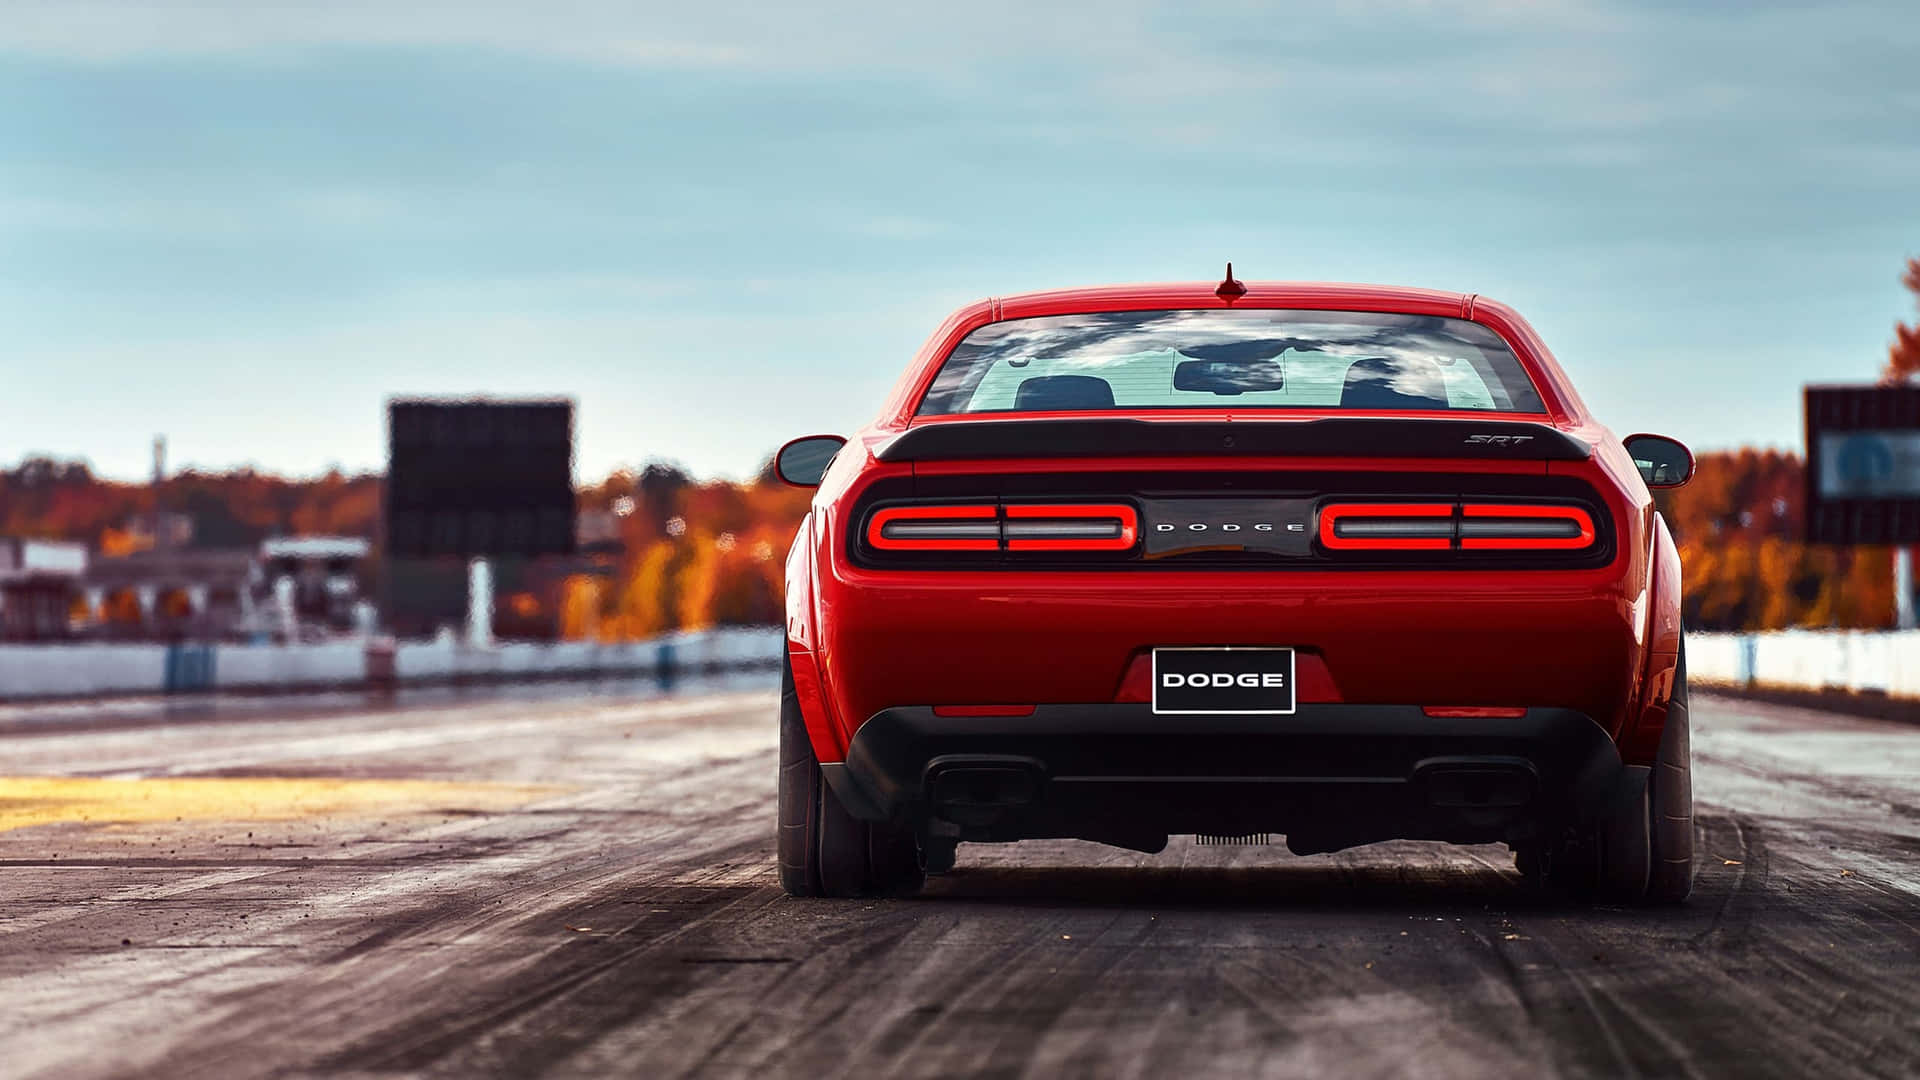 The Rear End Of A Red Dodge Challenger Wallpaper